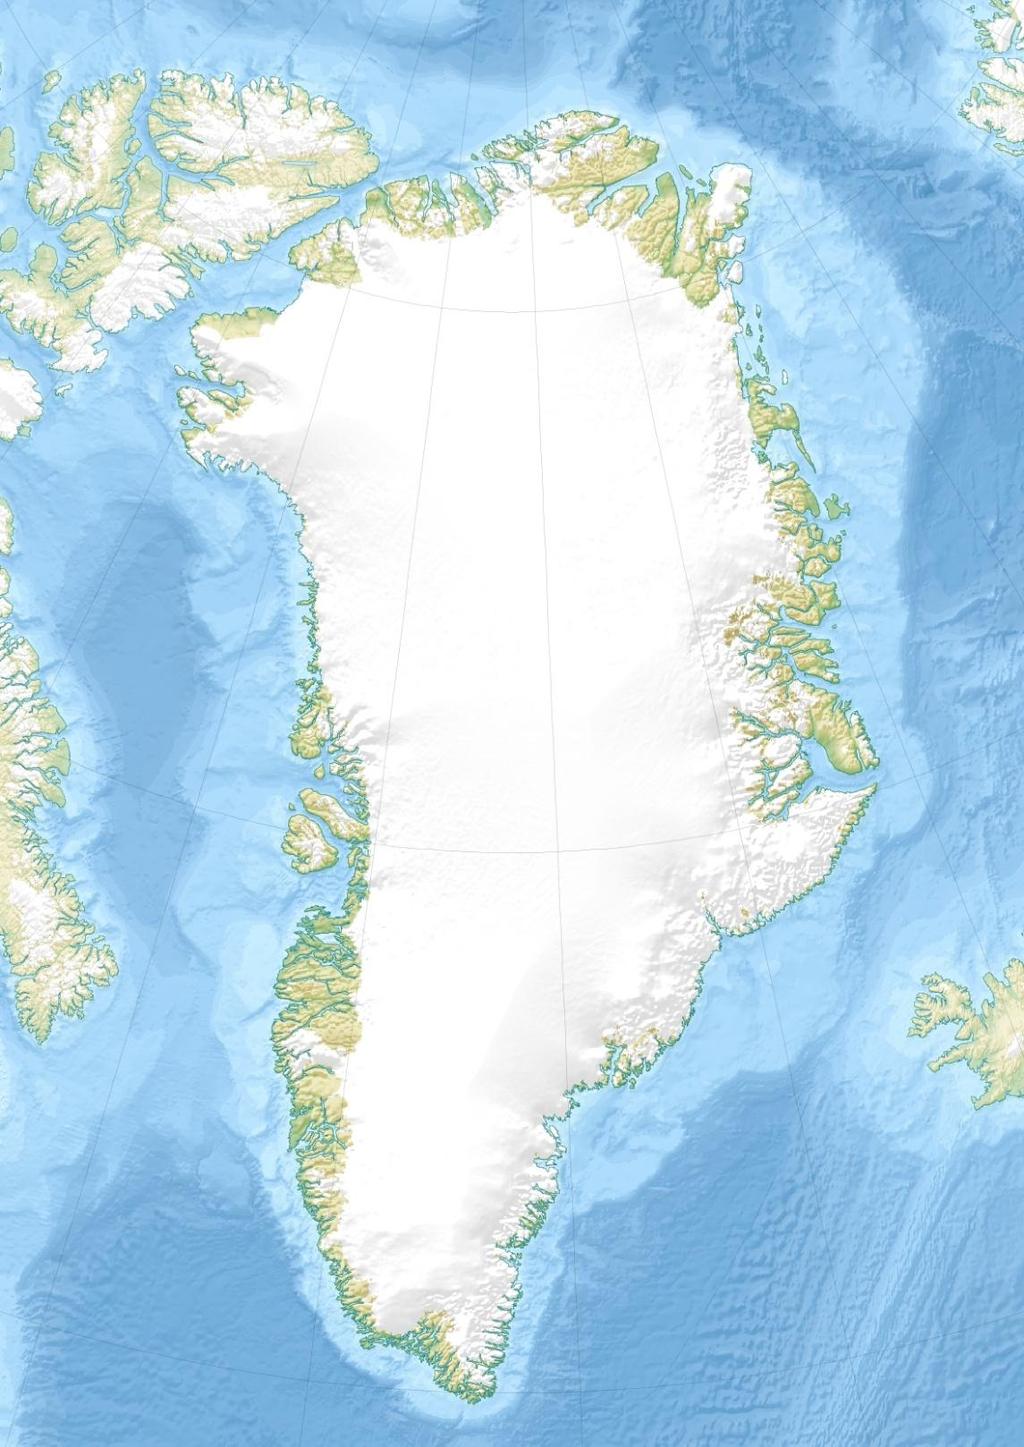 Is Greenland Really THAT big Plan: As an